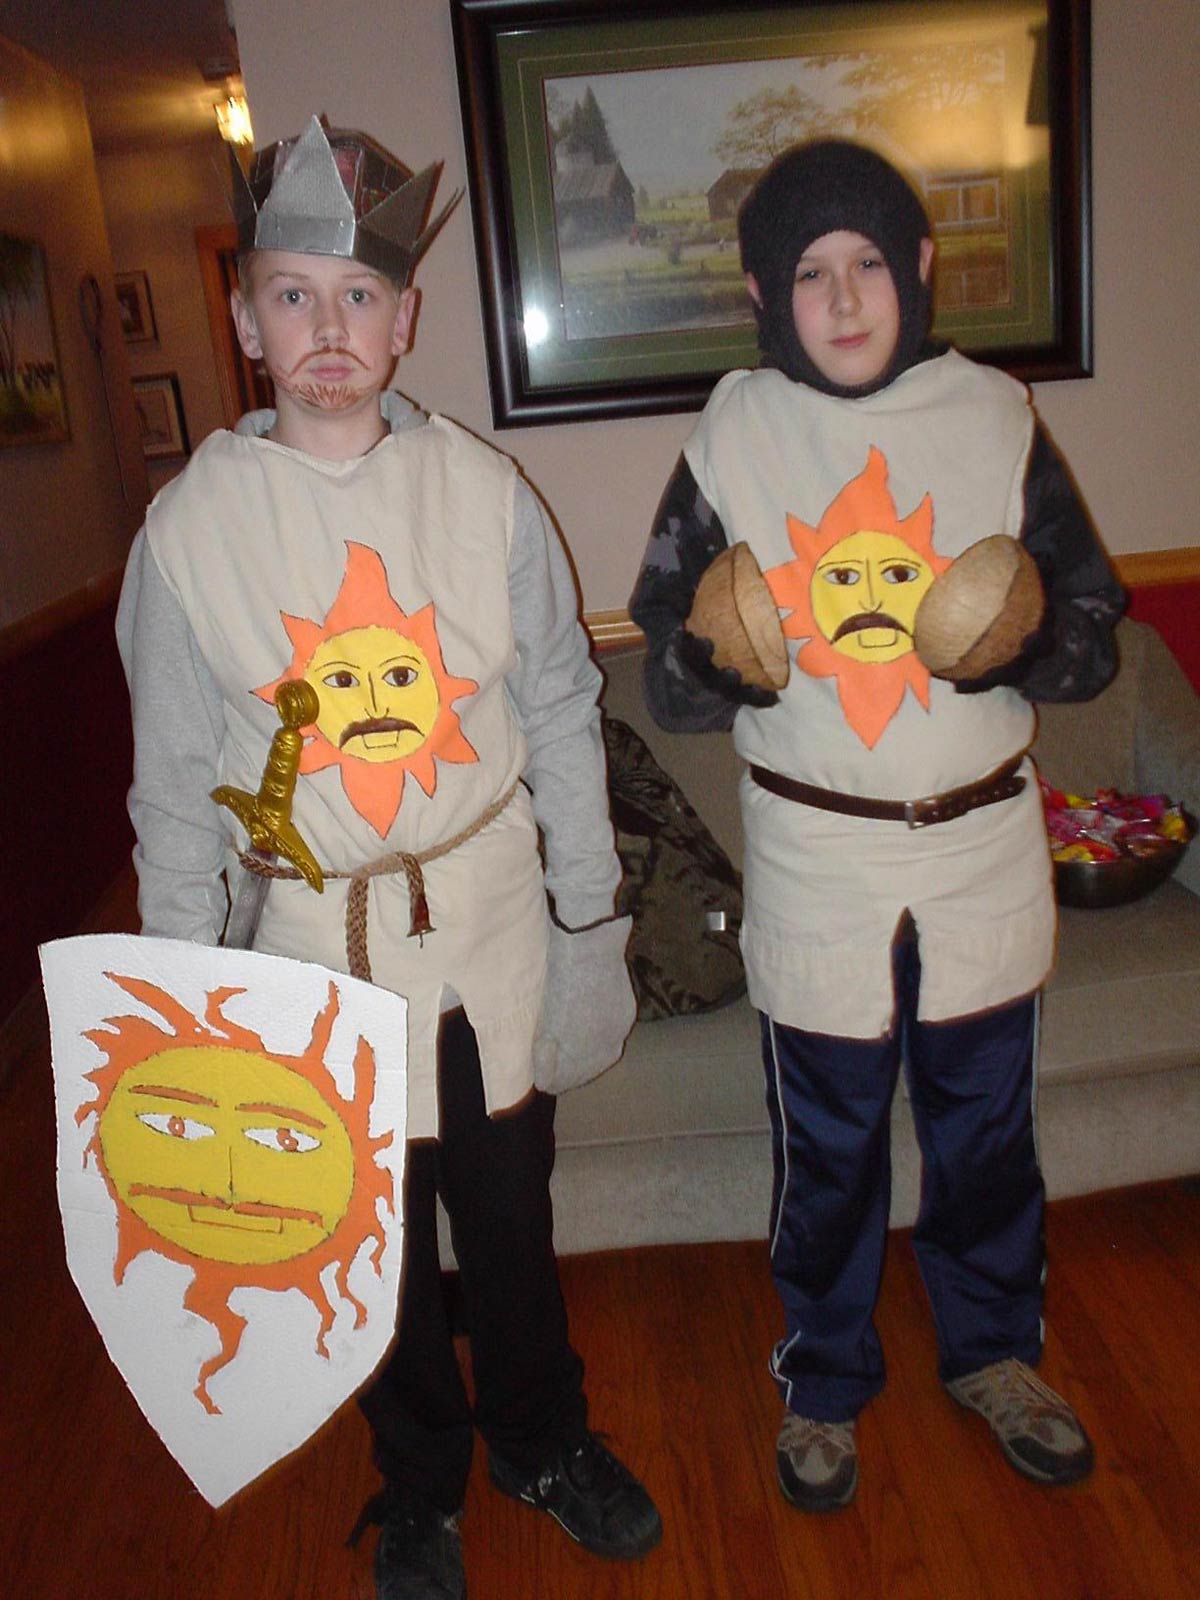 My son and his friend in their home-made costumes a few years back